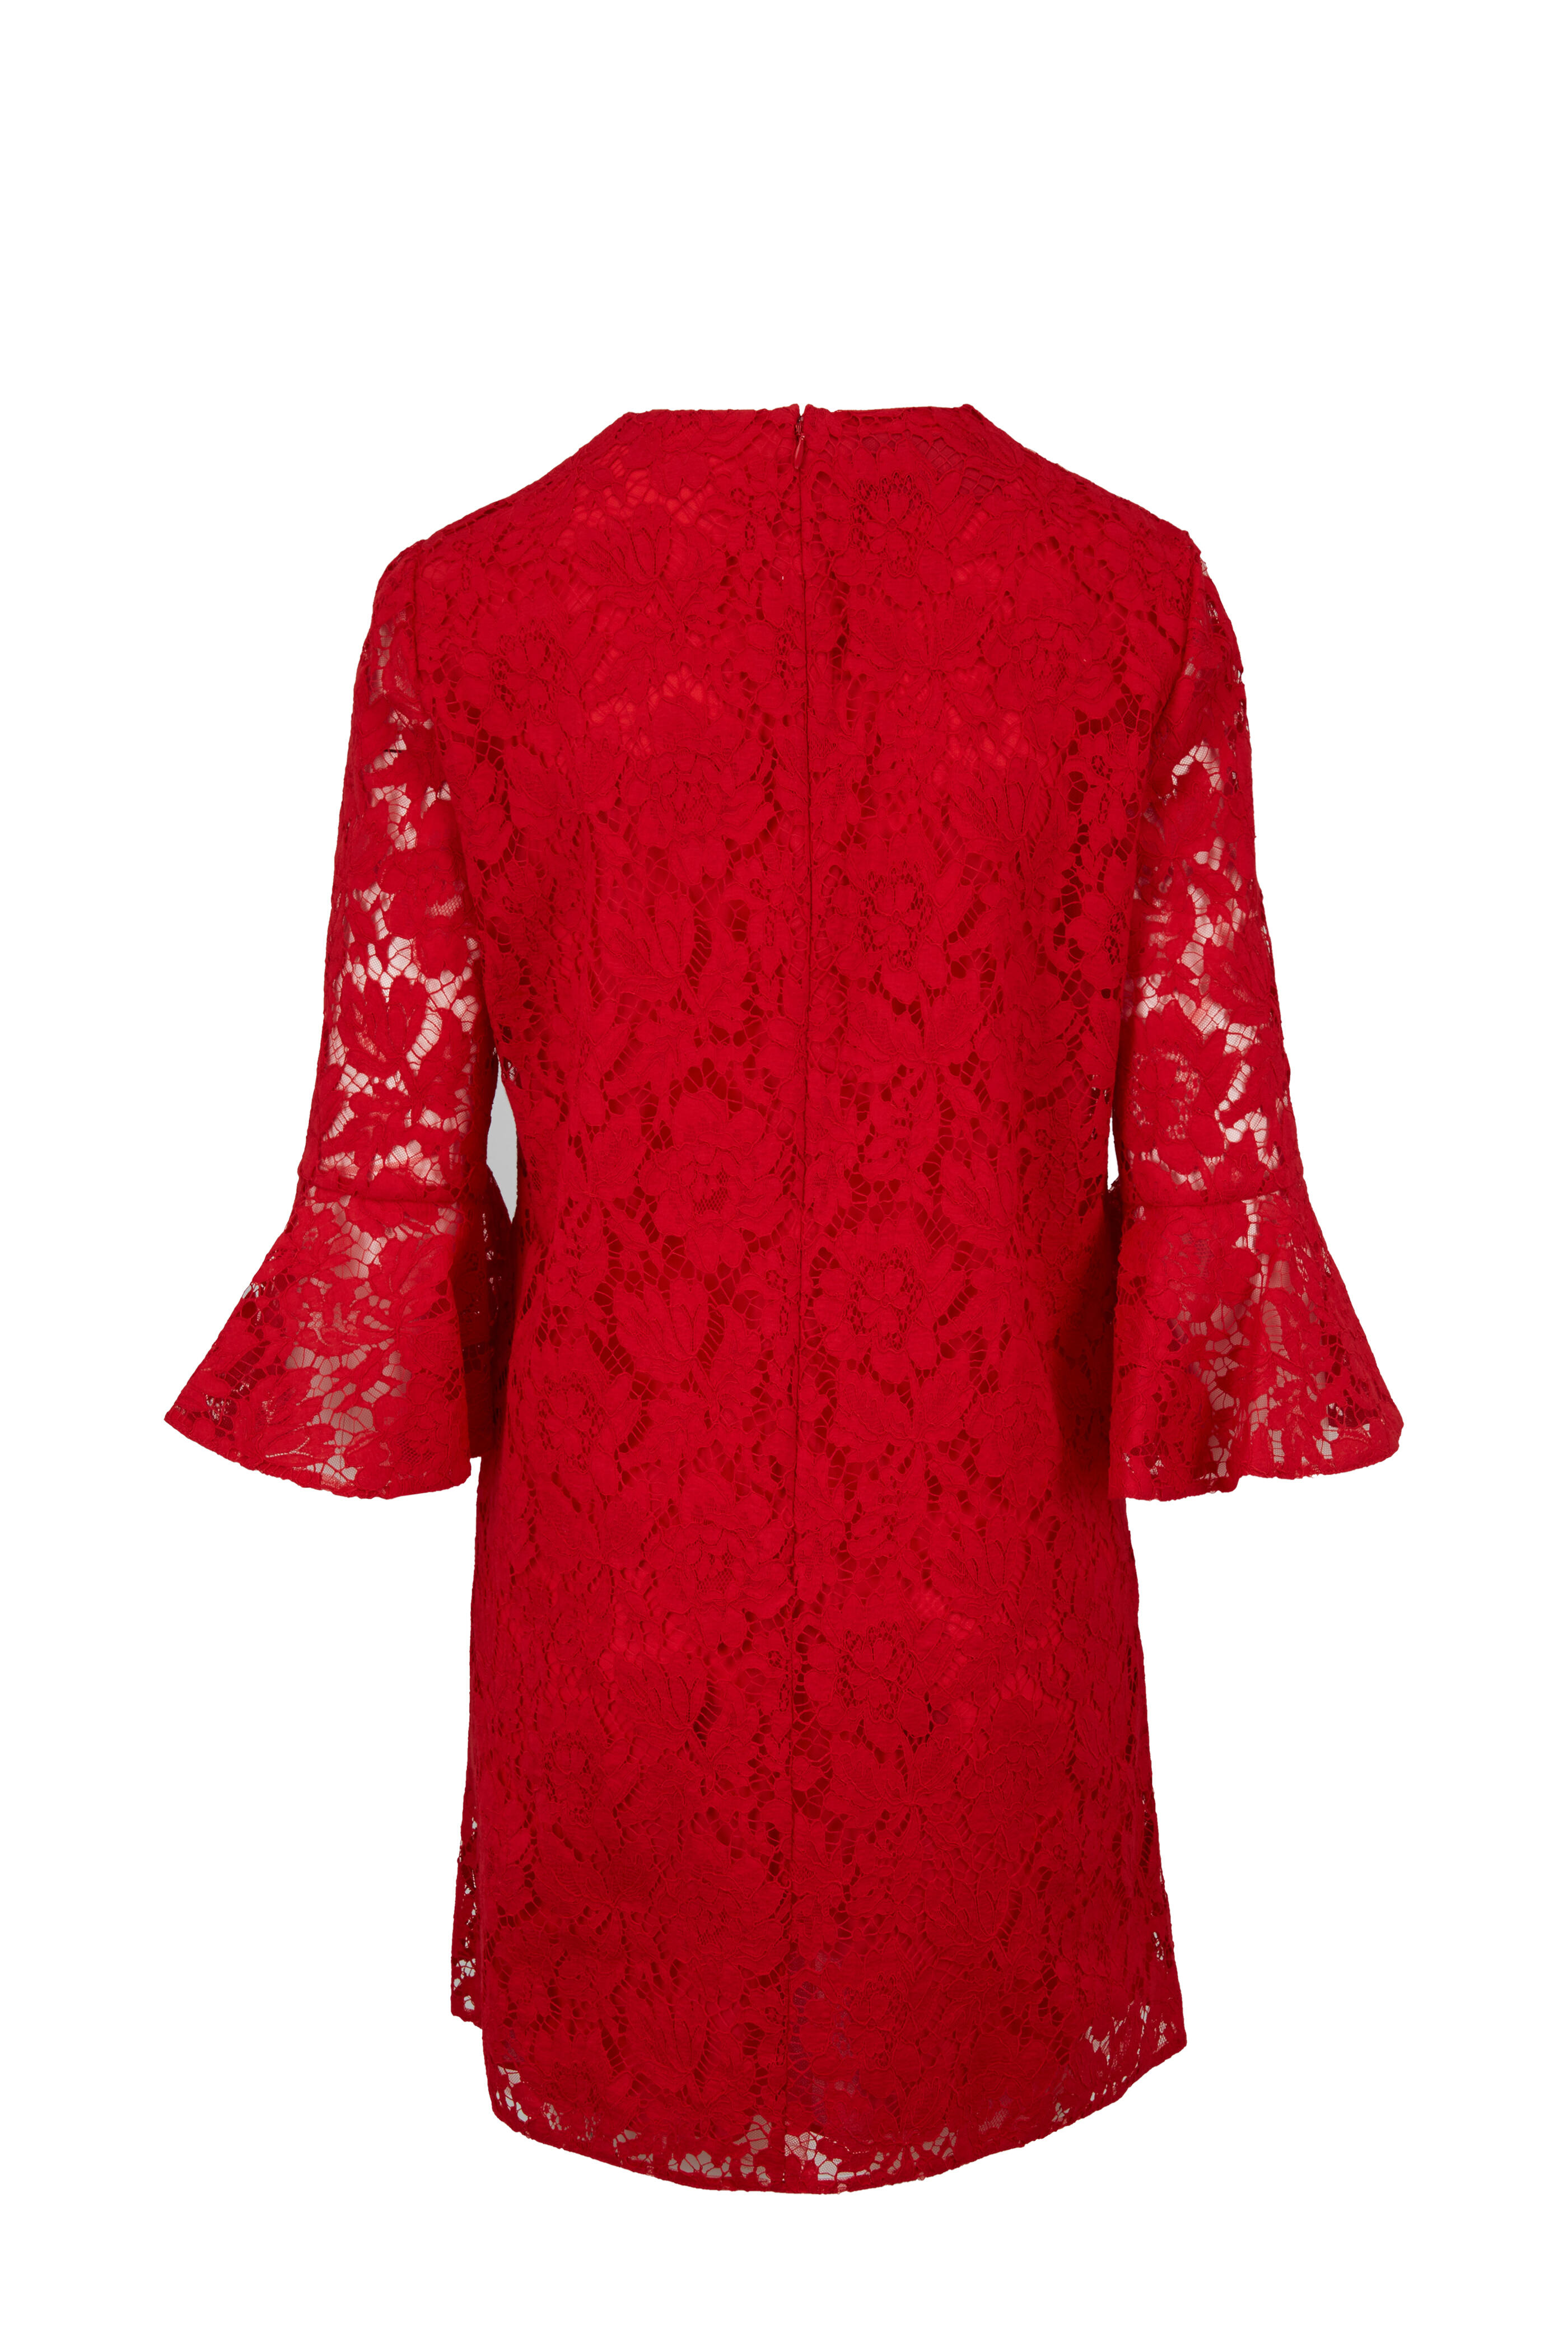 Valentino - Lace Sleeve Dress | Mitchell Stores